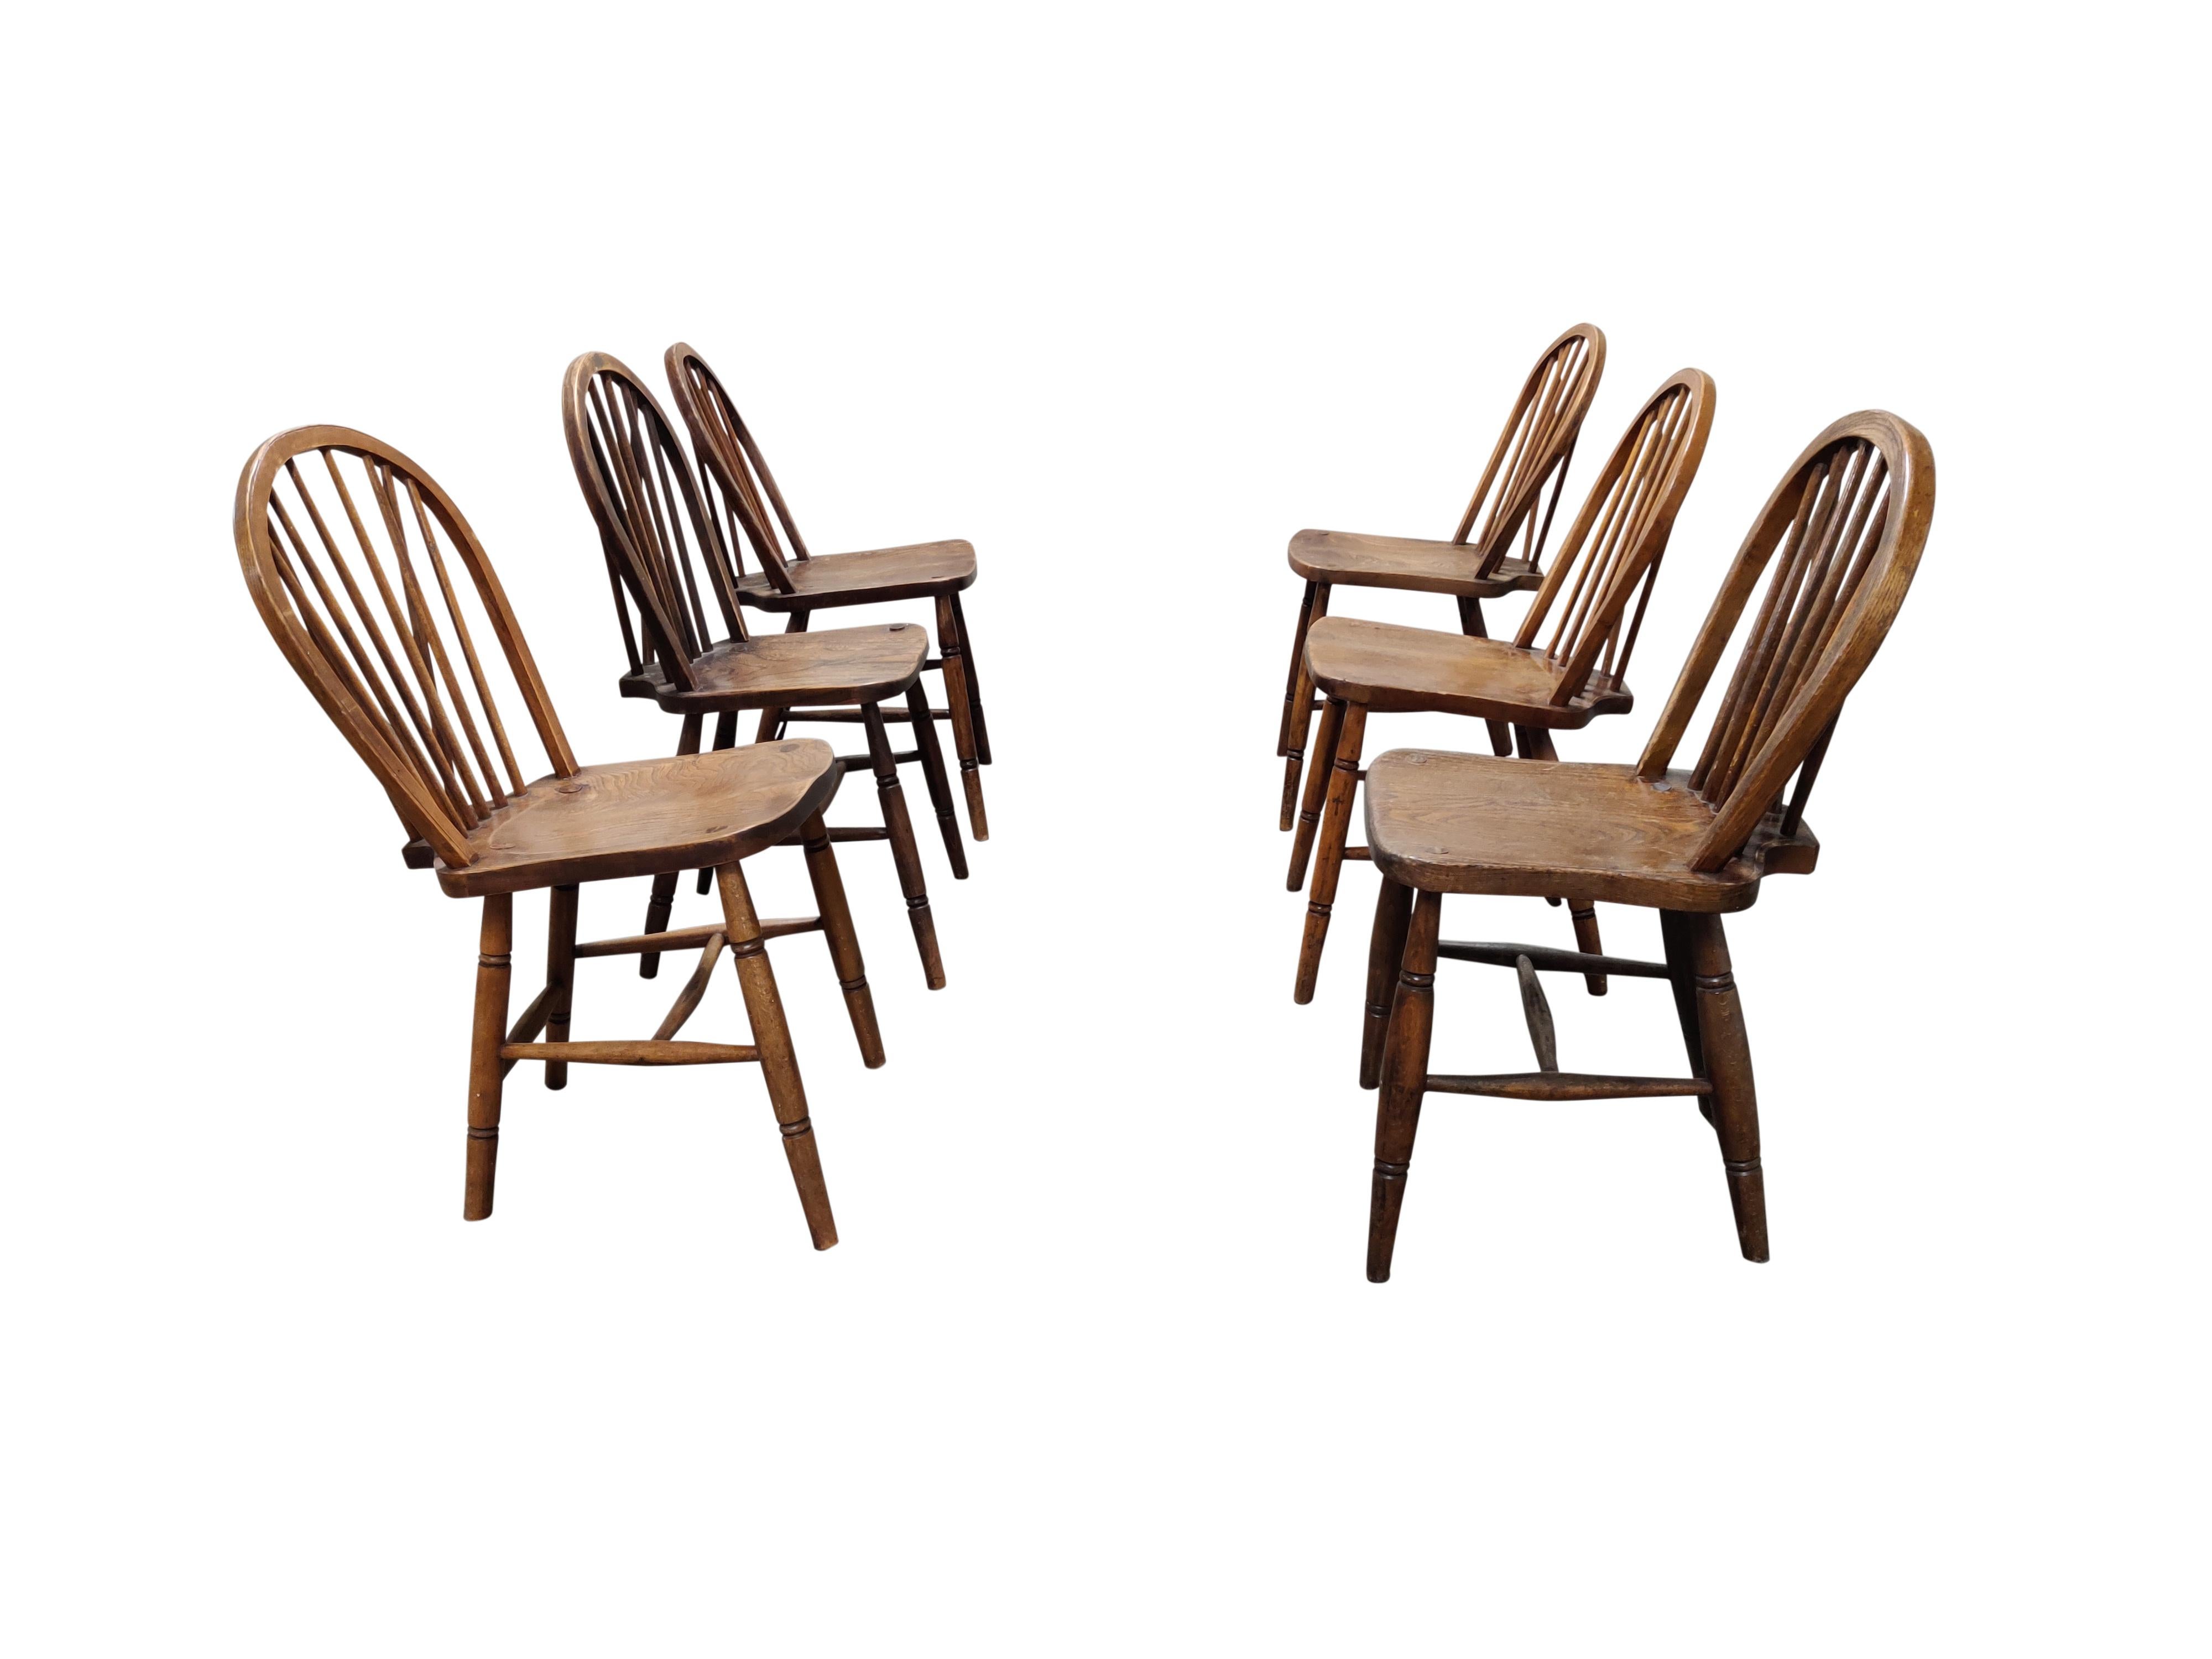 Set of 6 unique solid wooden dining chairs. 

This chairs were made in the 1950s by Lucian Ercolani.

As you can see in the pictures, the chairs have a very special backside which is typical for Ercol chairs.

1950s Italy

The chairs are